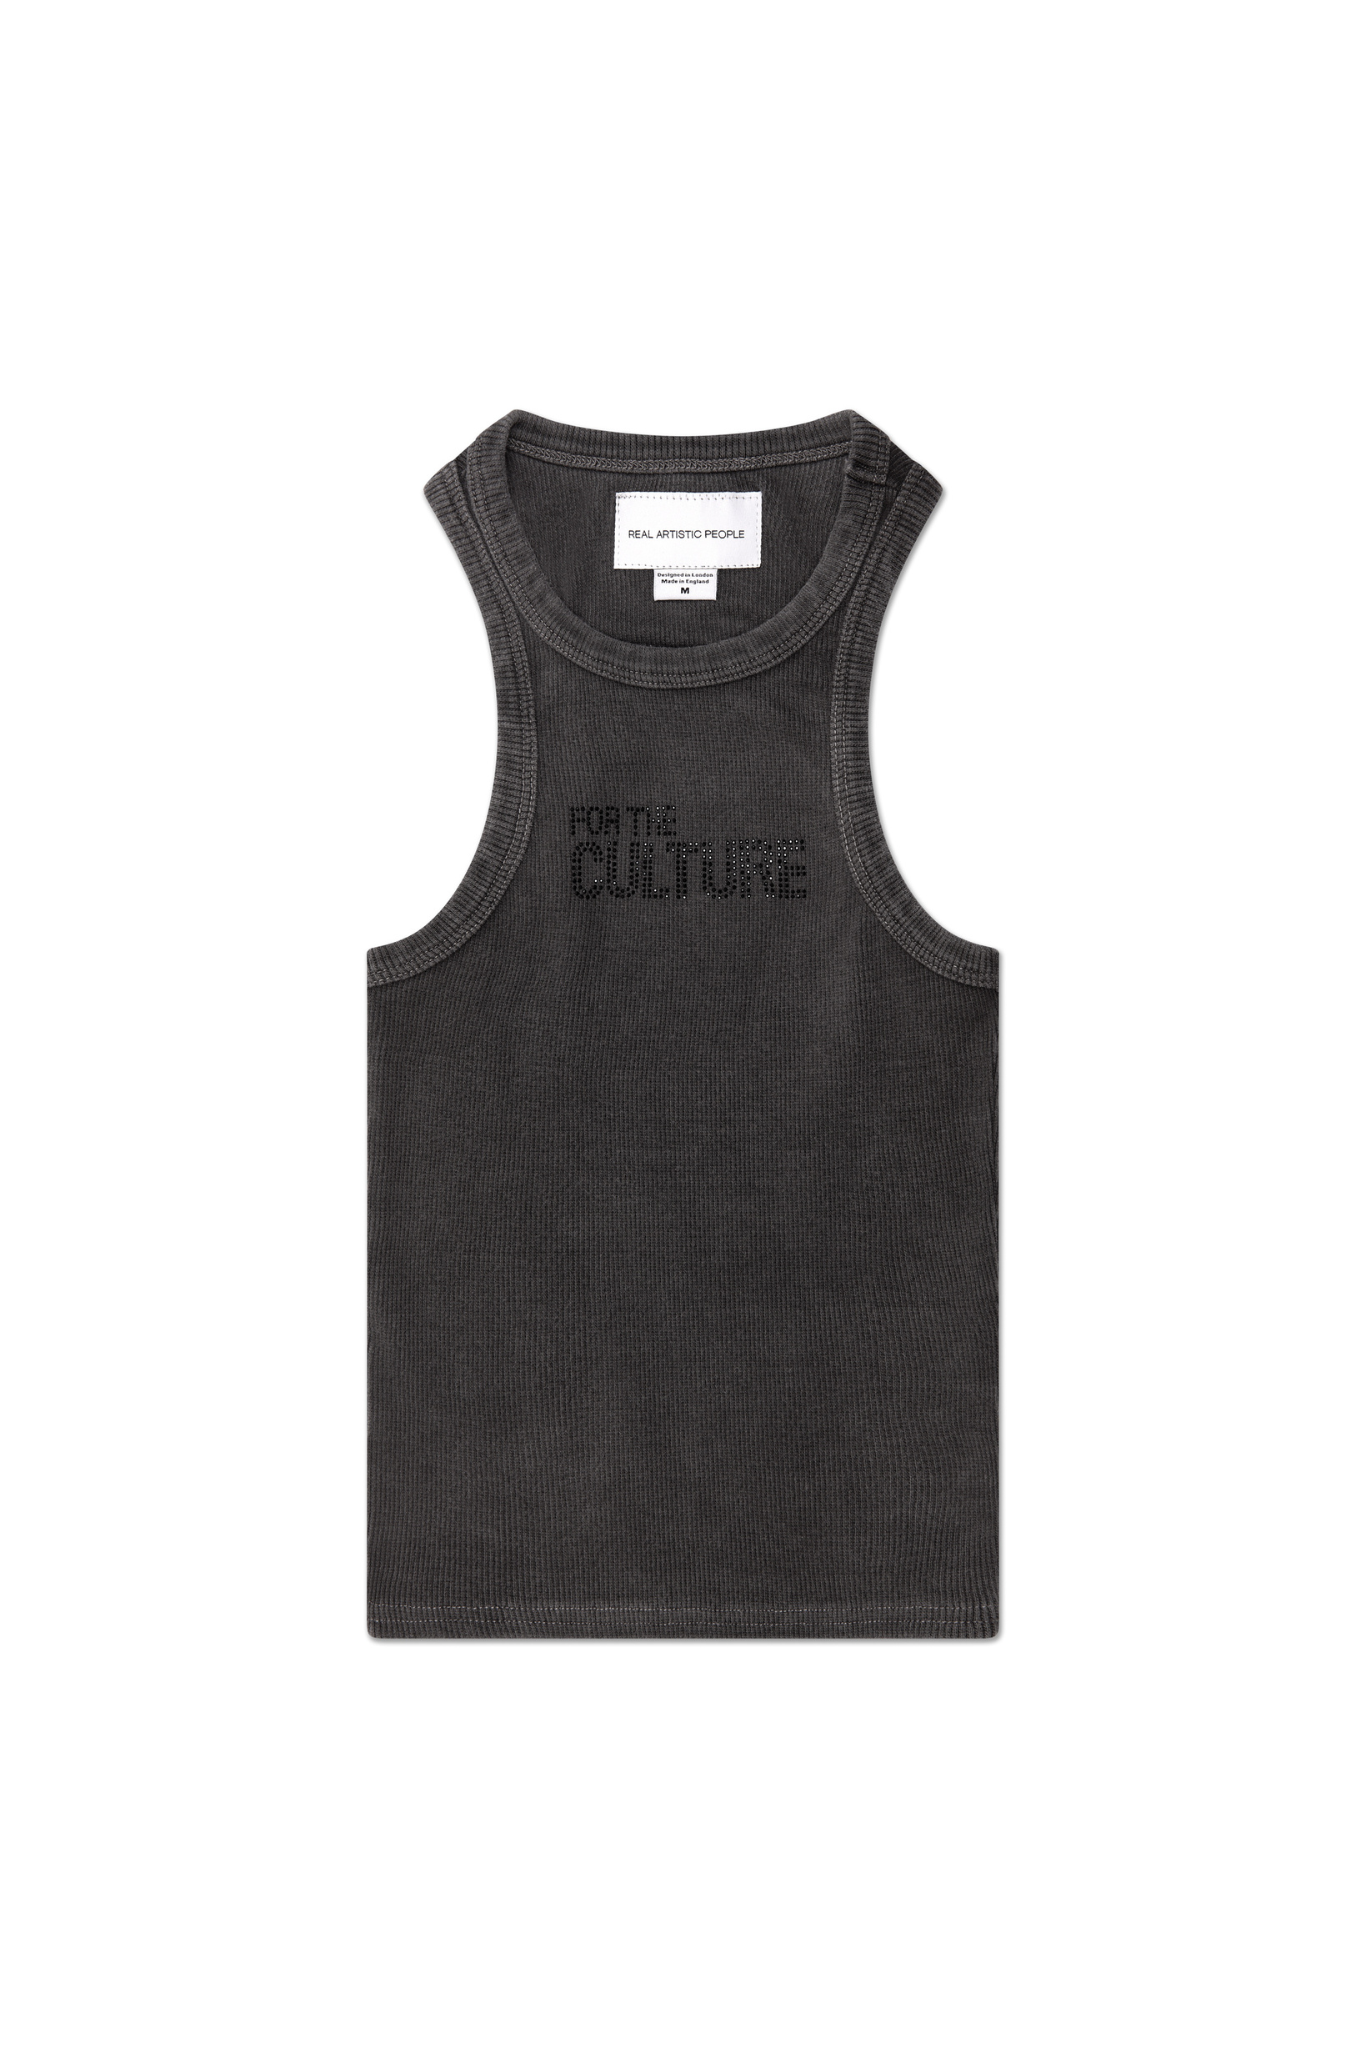 For The Culture Crystal Tank Top - Charcoal Grey